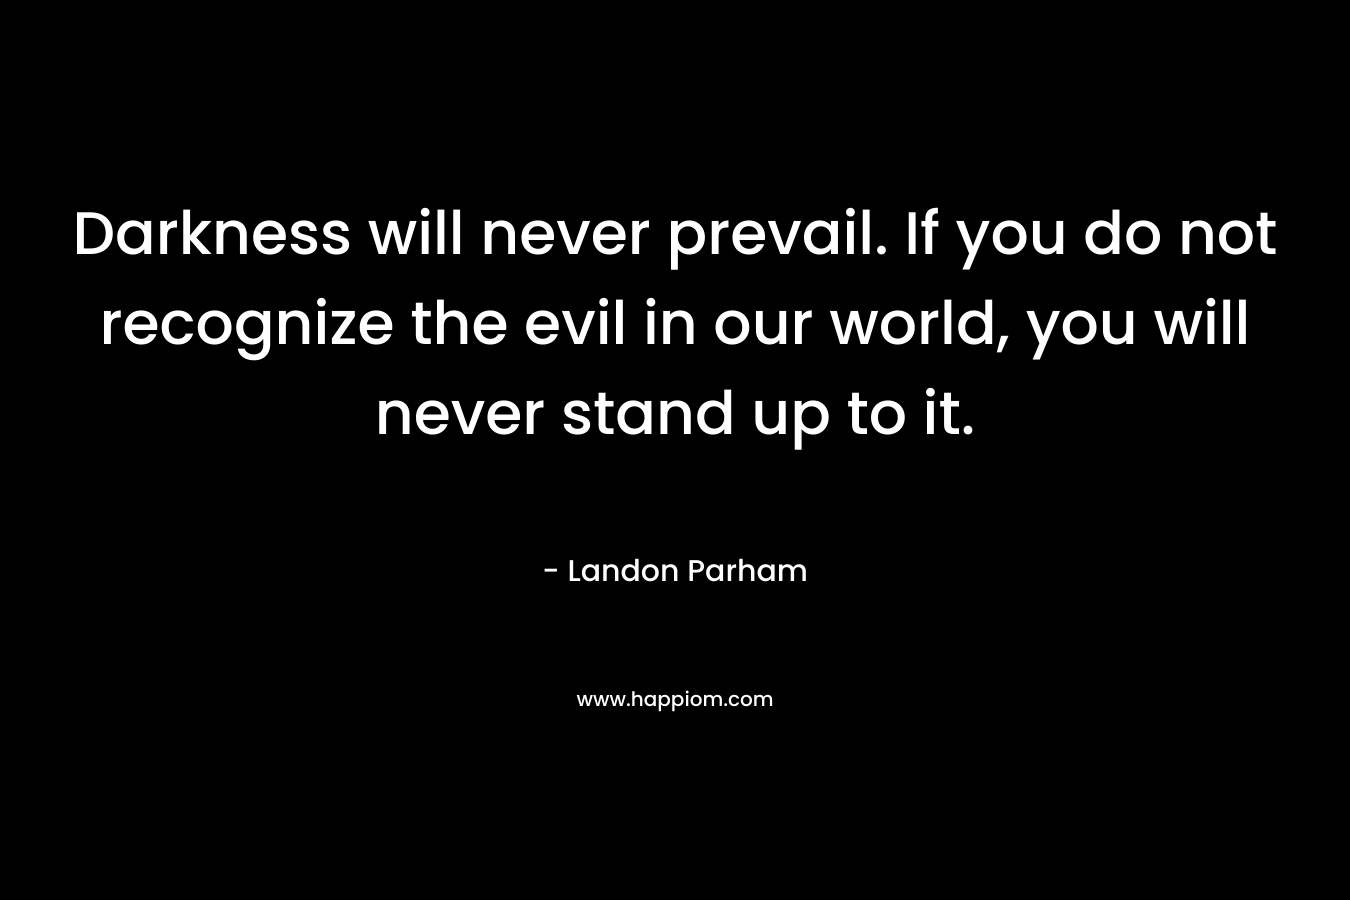 Darkness will never prevail. If you do not recognize the evil in our world, you will never stand up to it. – Landon Parham